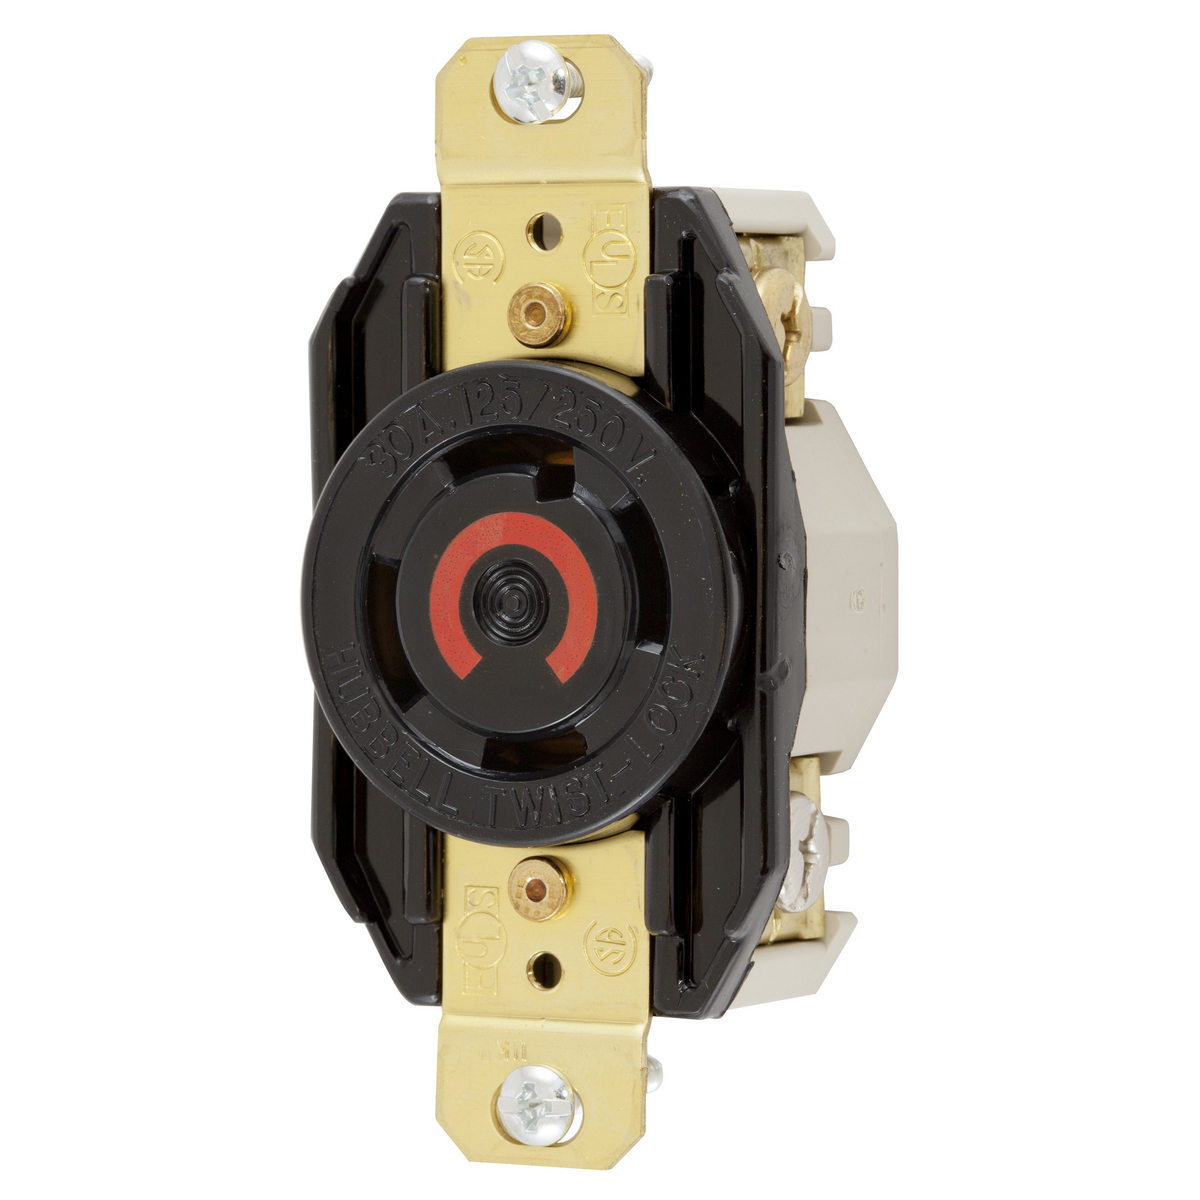 HBL2710 Locking Receptacle Hubbell Wiring Device-Kellems